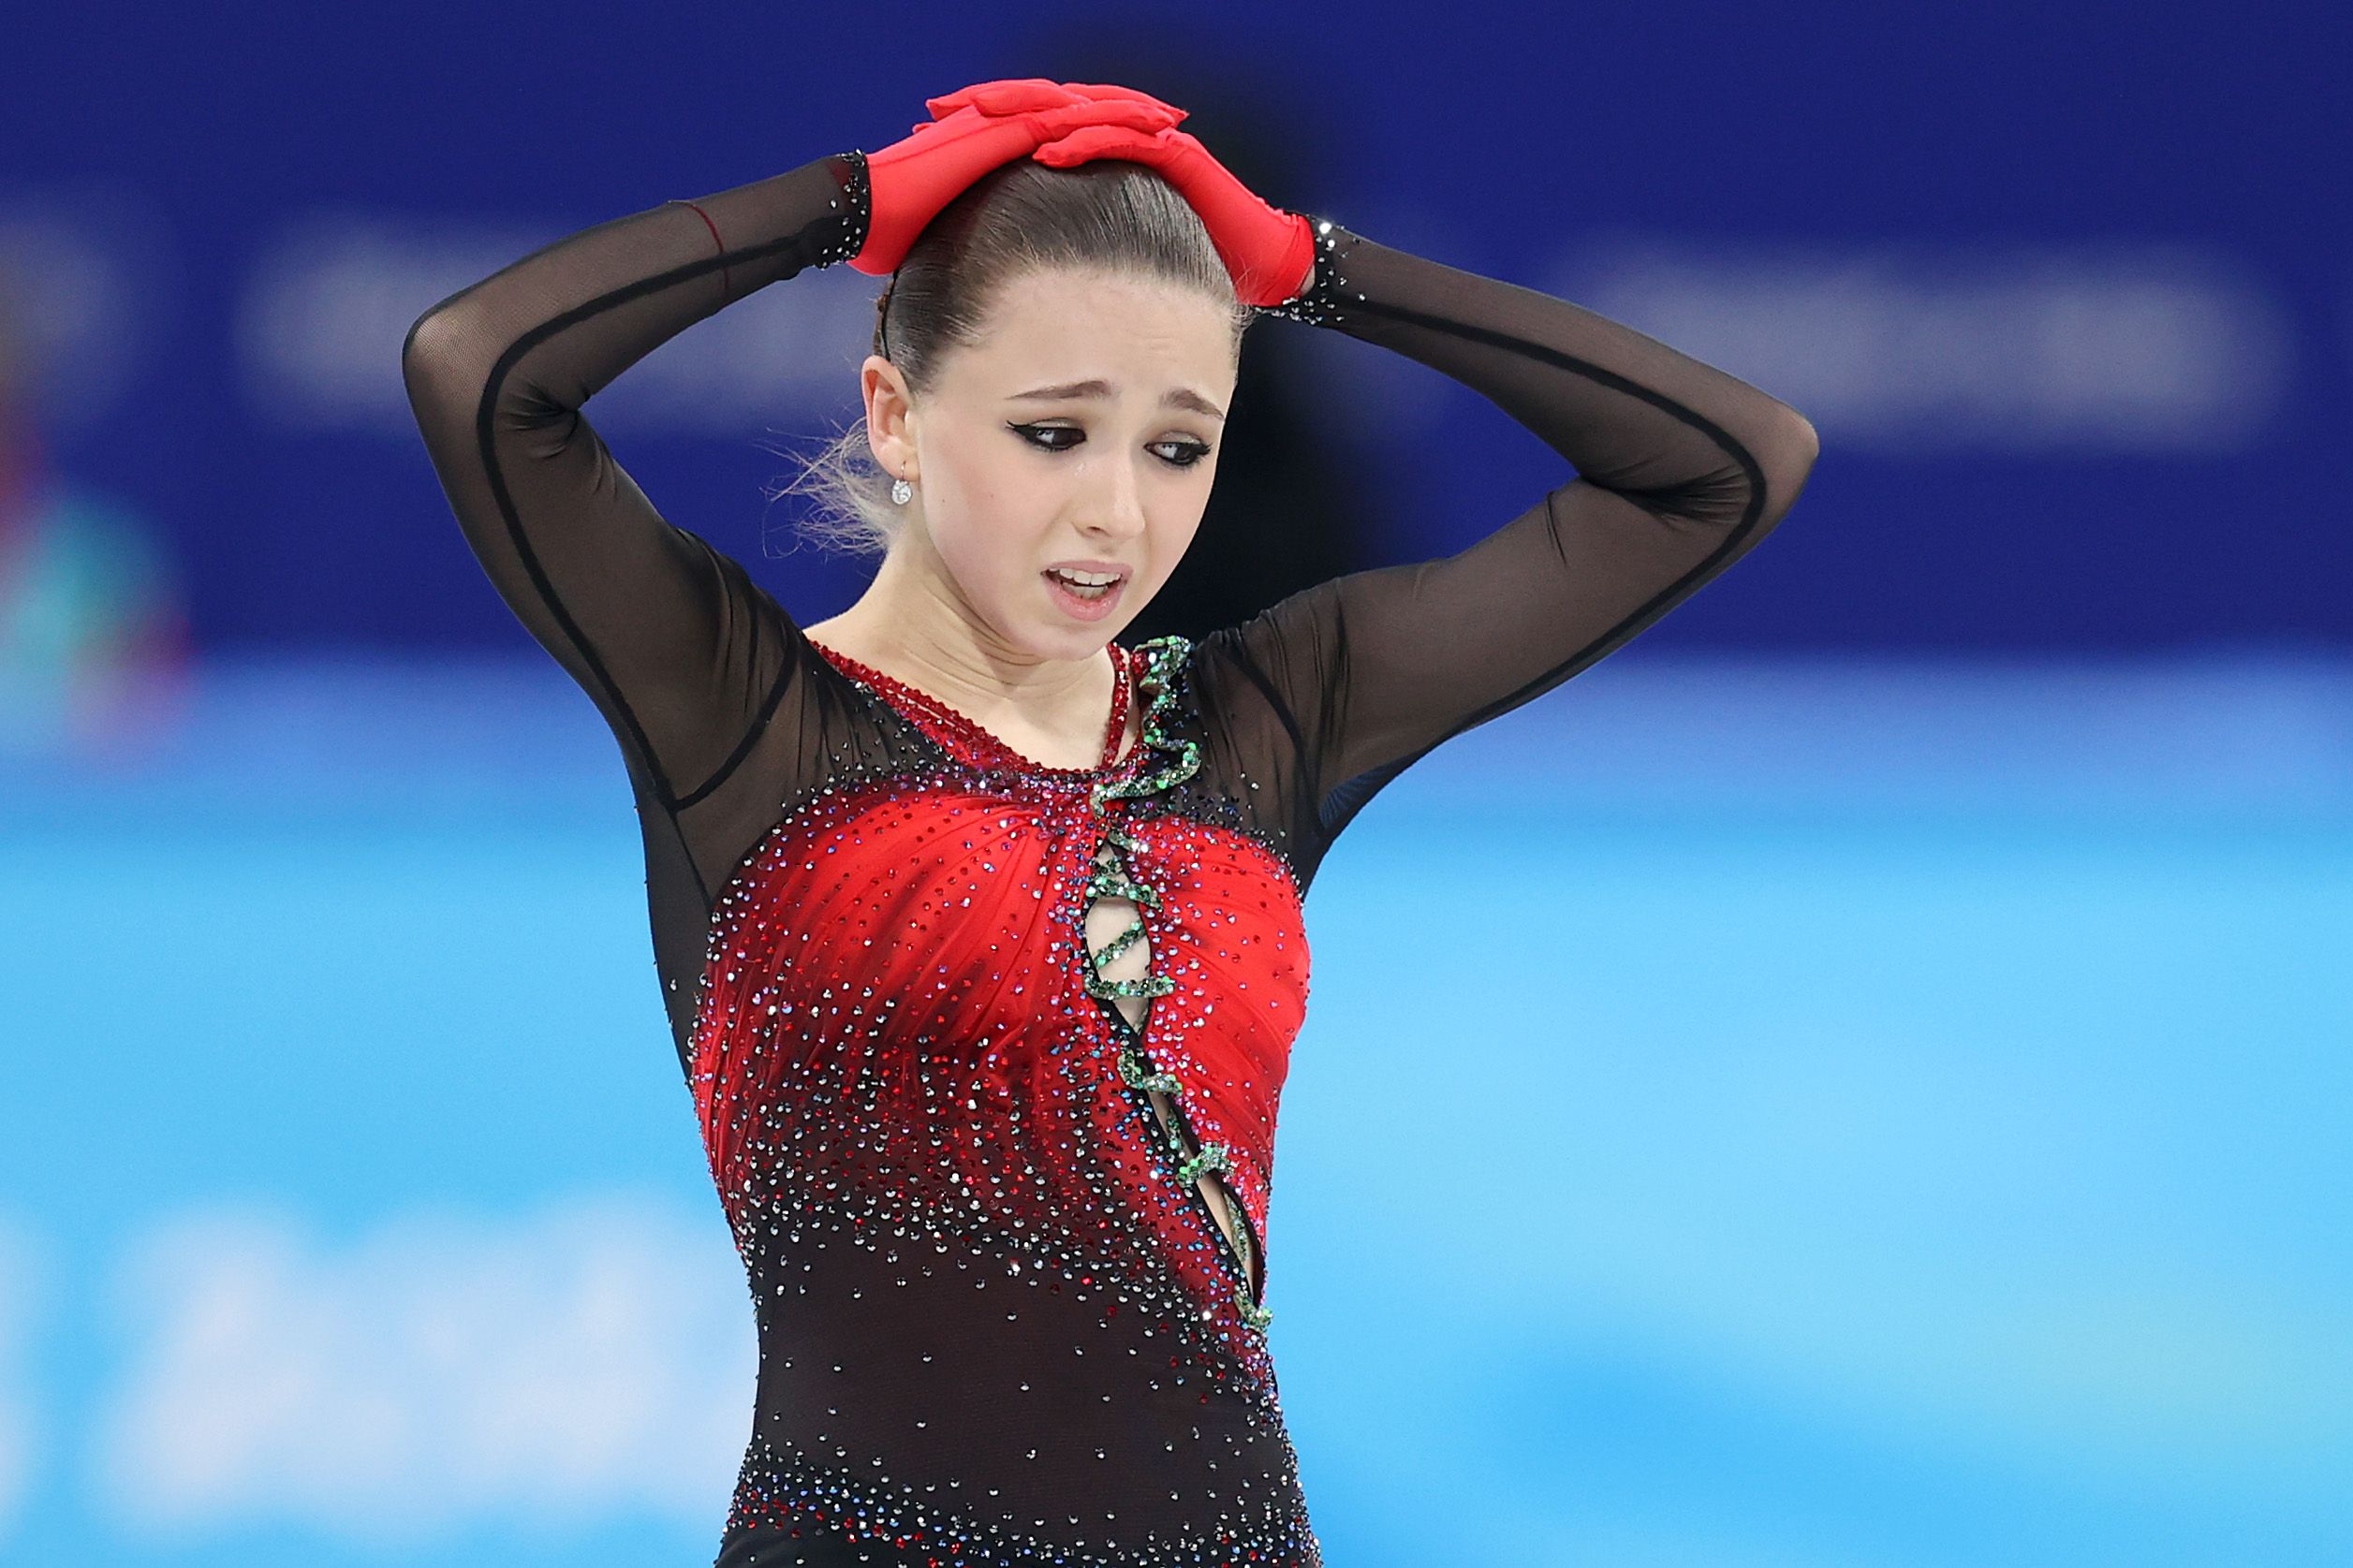 Russian Olympic Committee figure skater Kamila Valieva at the 2022 Winter Olympic Games in Beijing, China. 